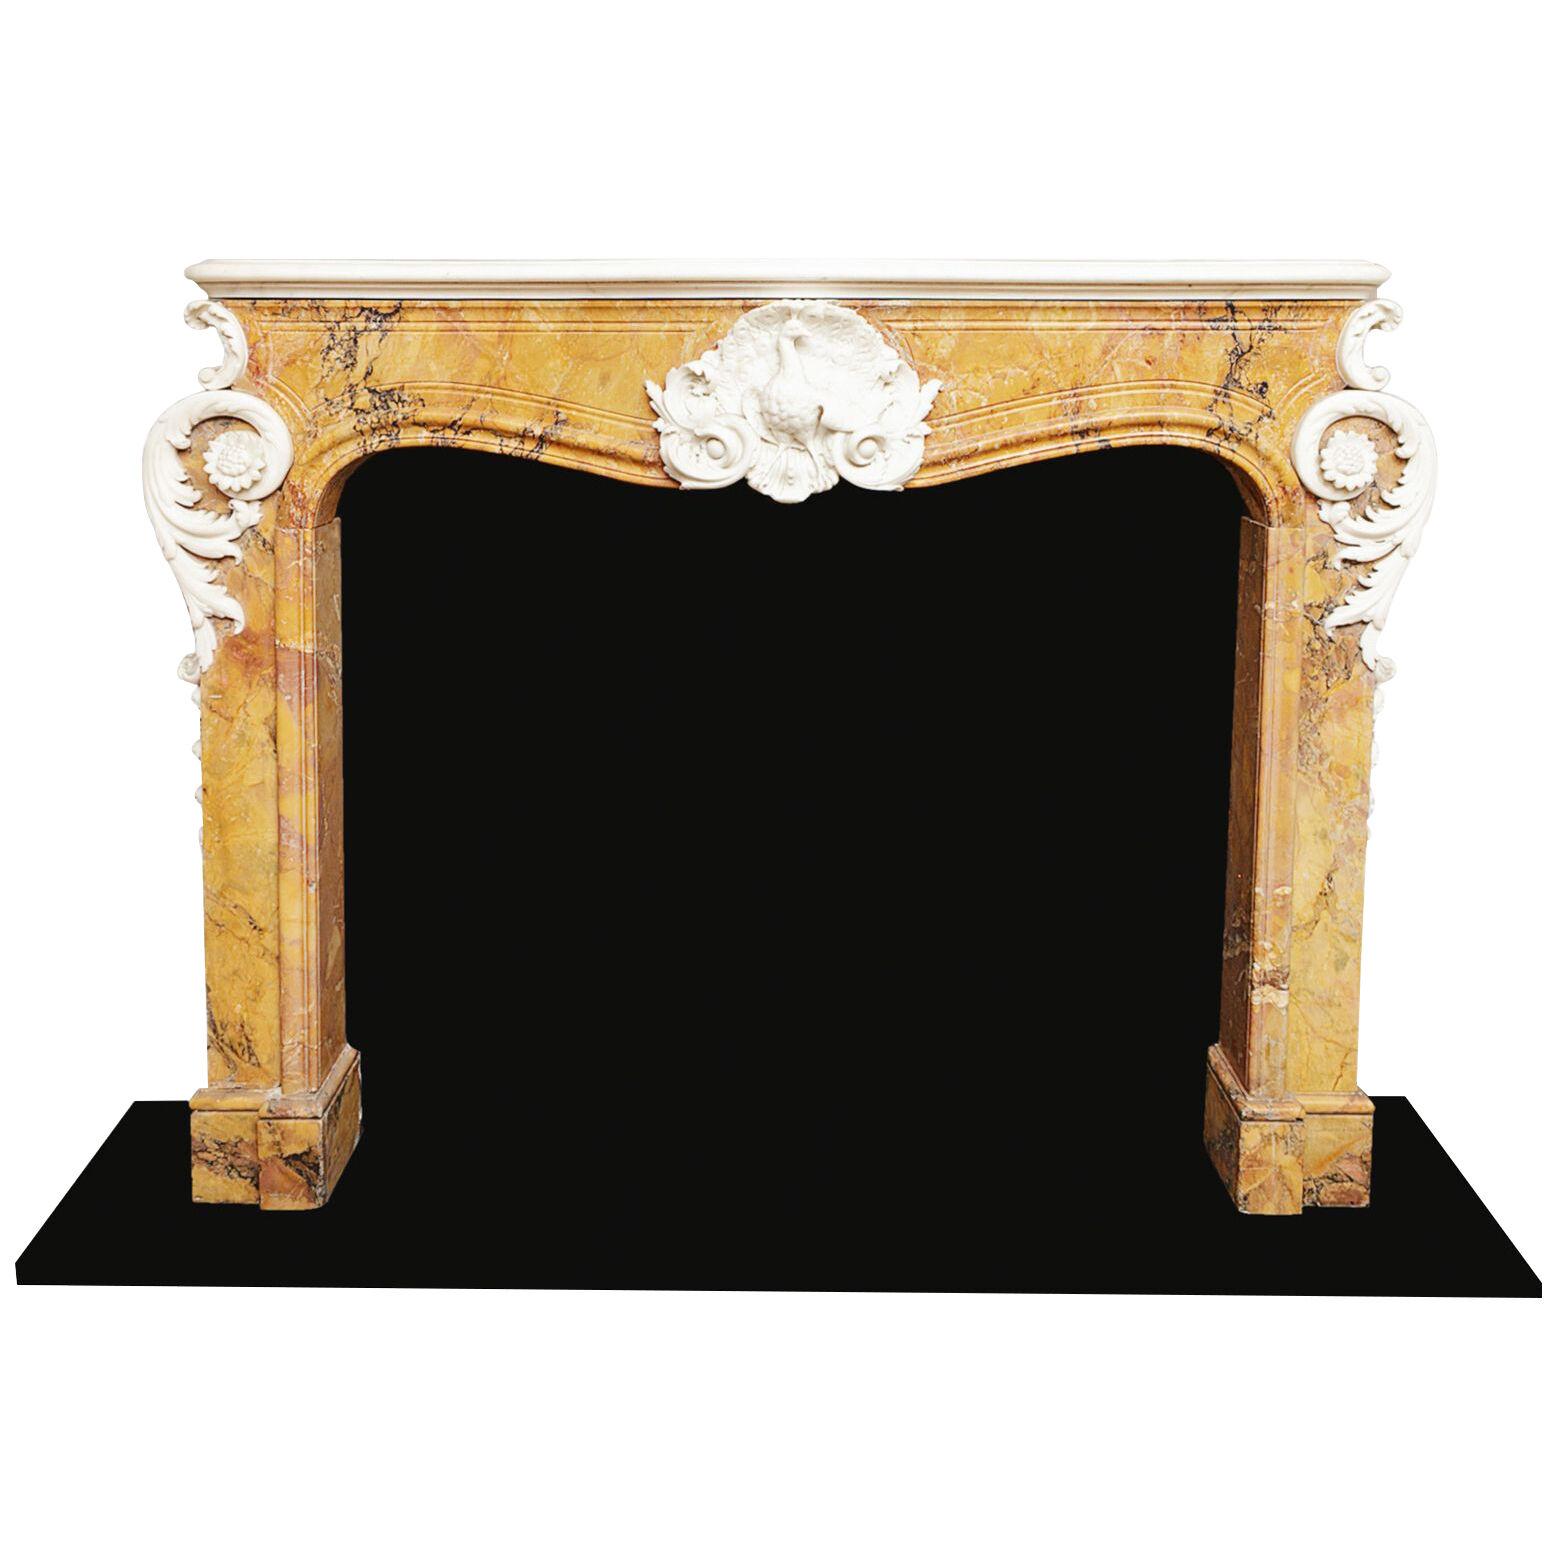 18th Century George II Sienna and White Statuary Marble Fire Surround